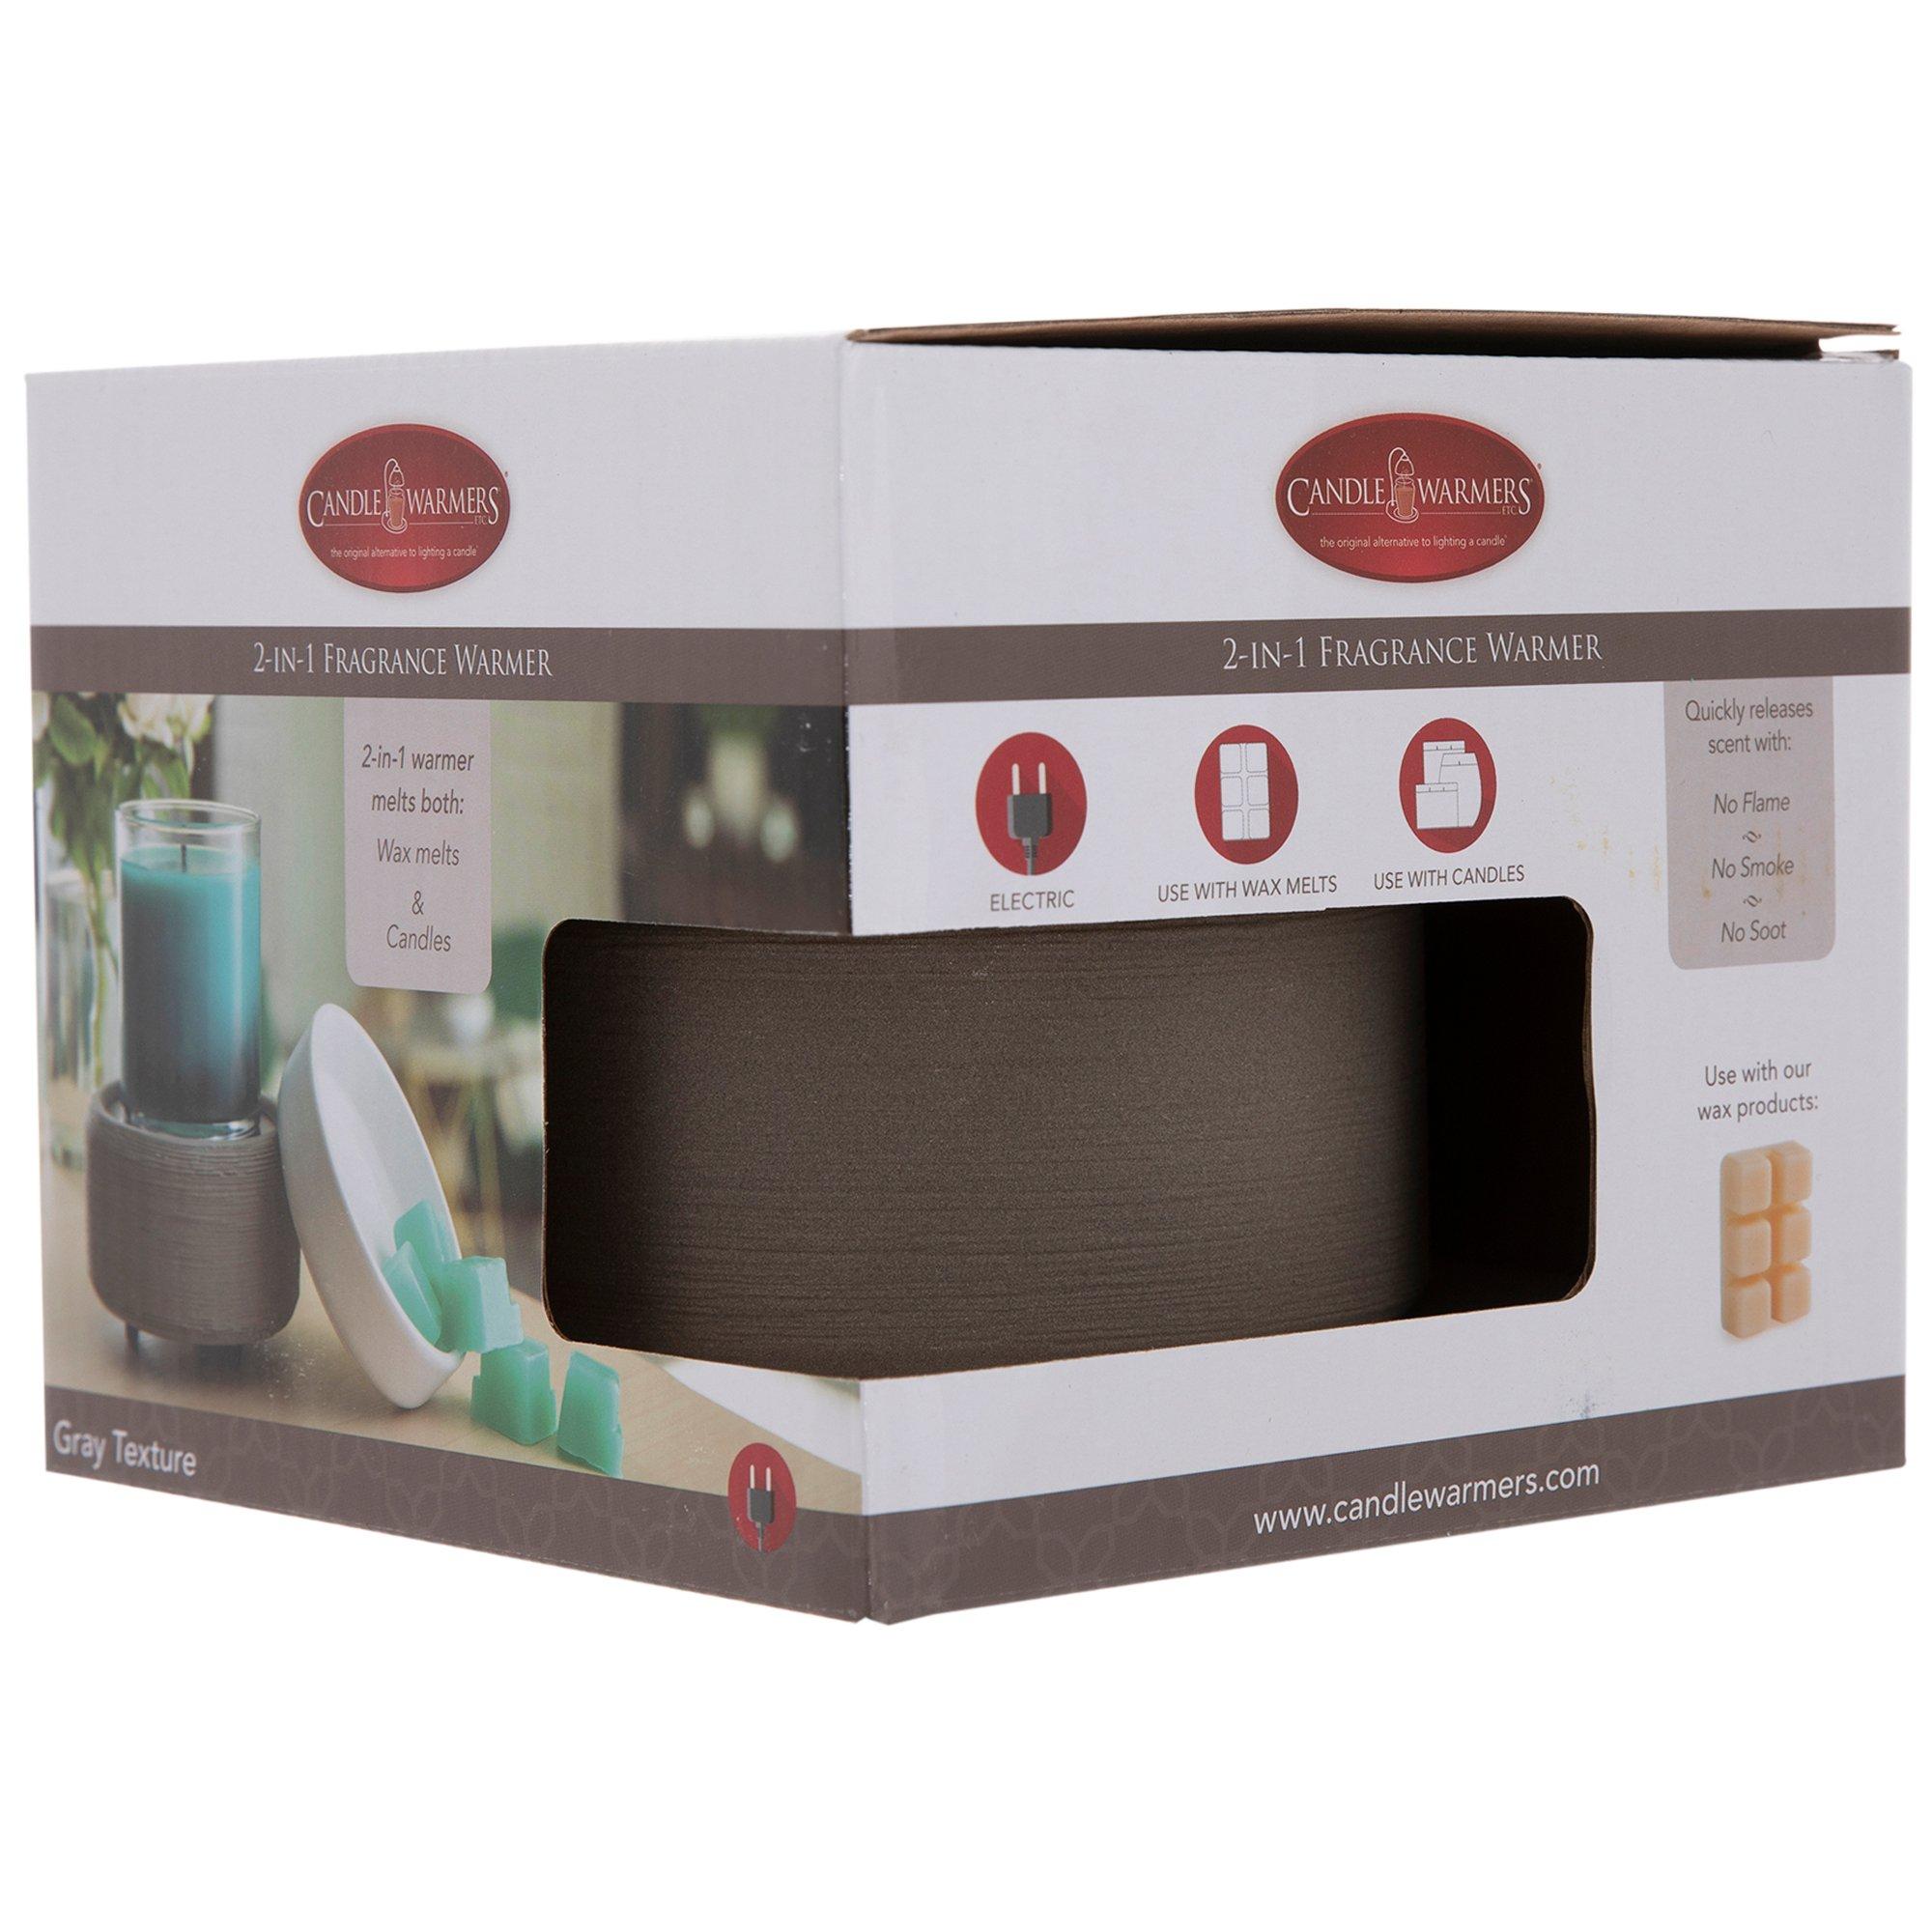 Candle Warmers 6 Gray 2 in 1 Fragrance Warmer